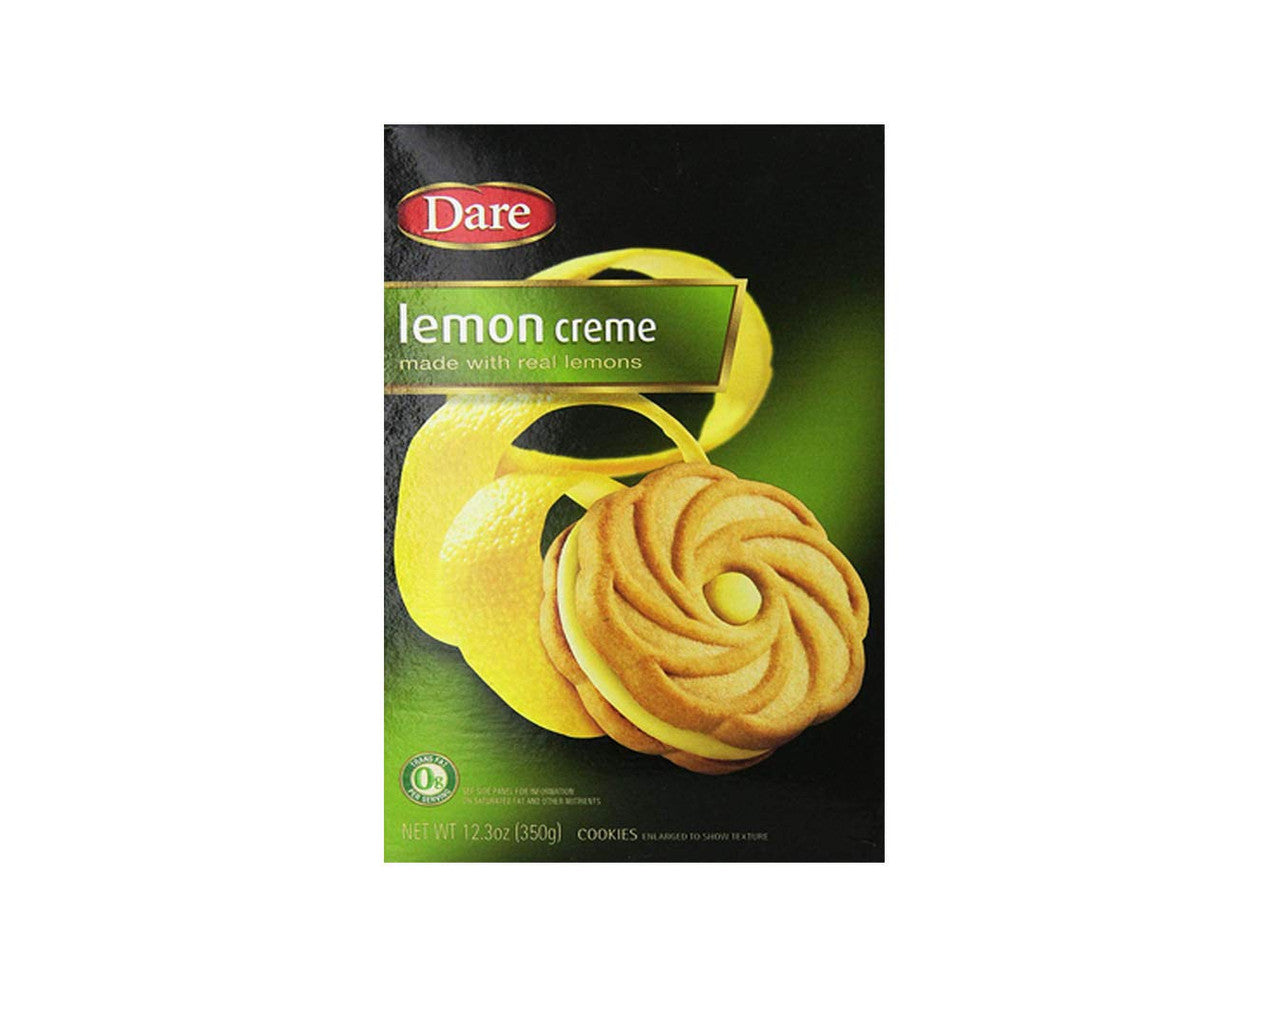 Dare Maple Creme Cookies and Dare Lemon Creme Cookies Bundle {Imported from Canada}